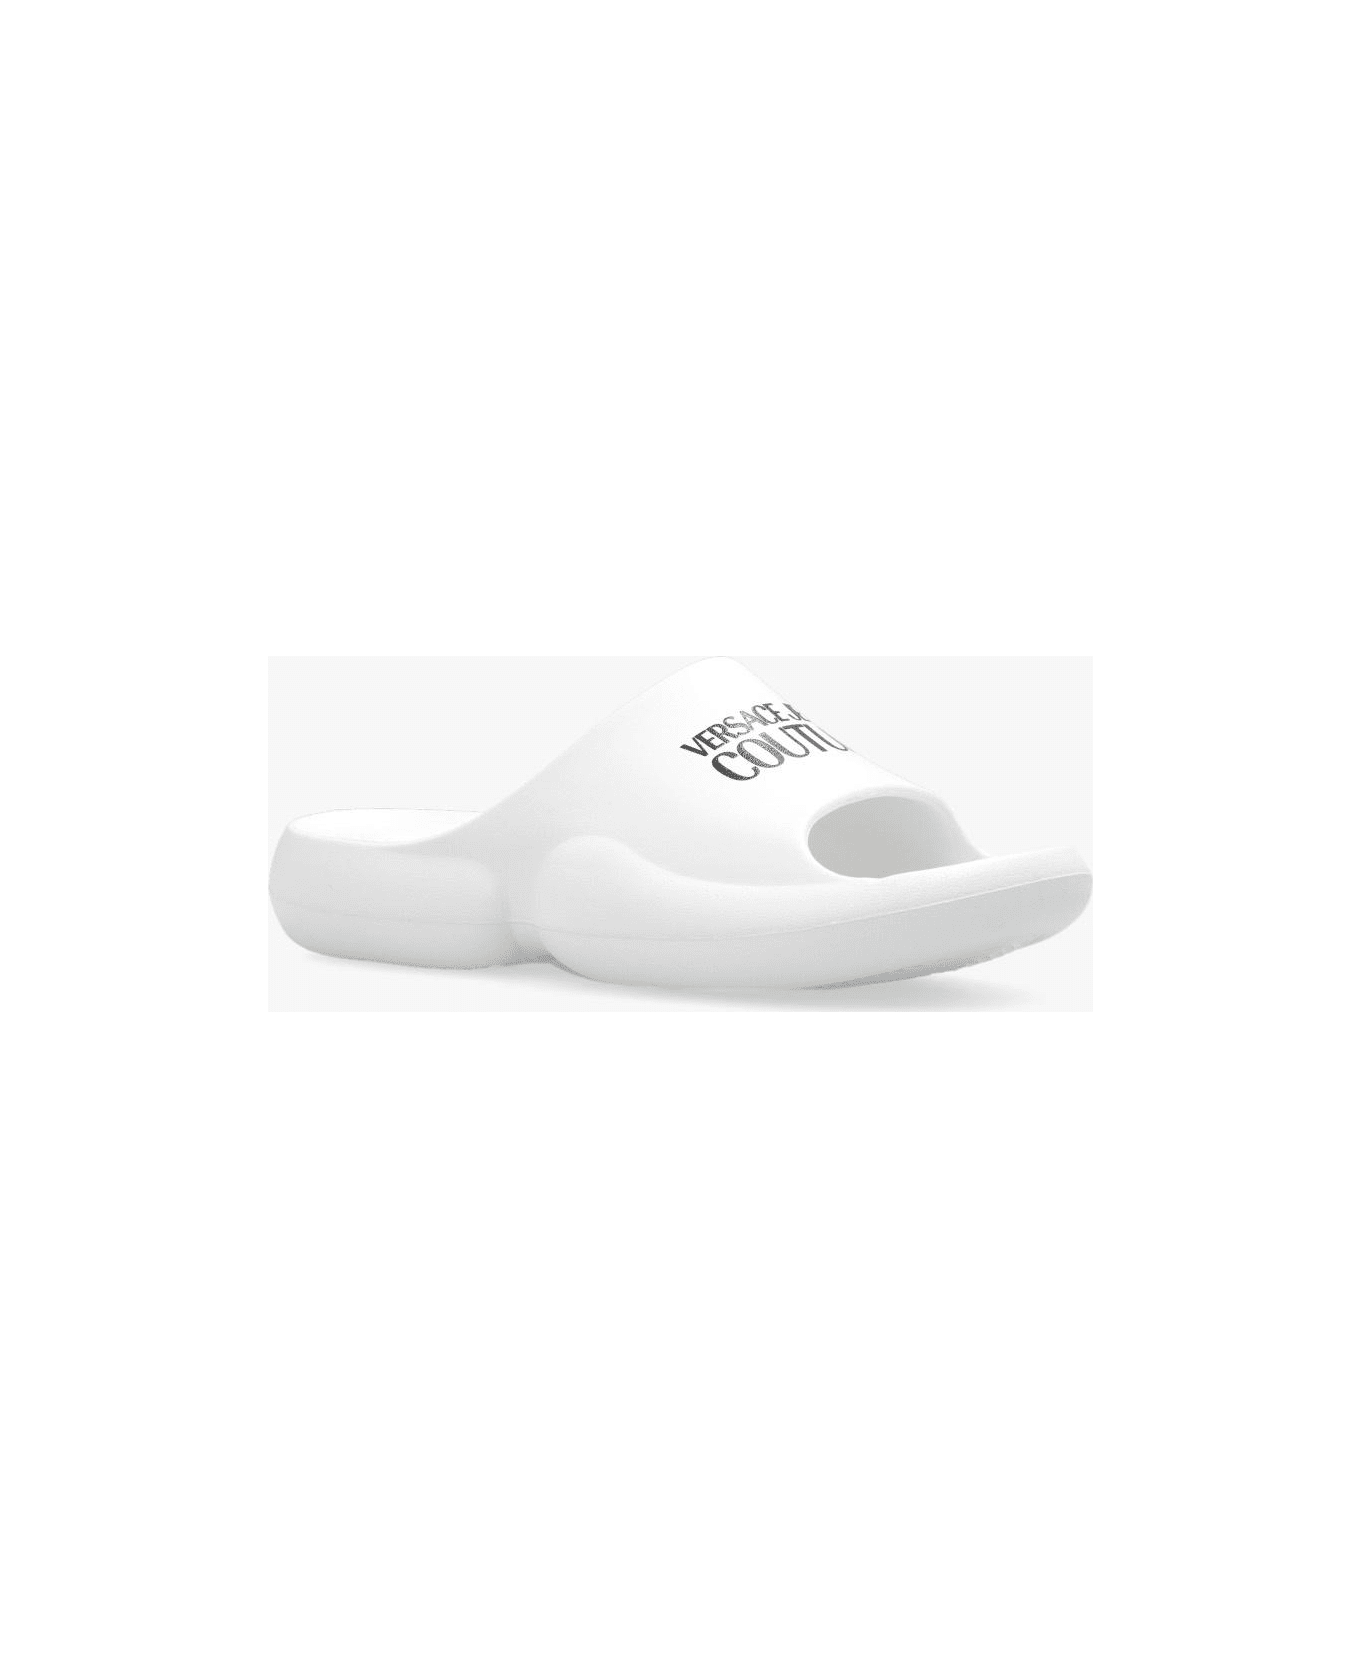 Versace Jeans Couture Slides With Logo - White